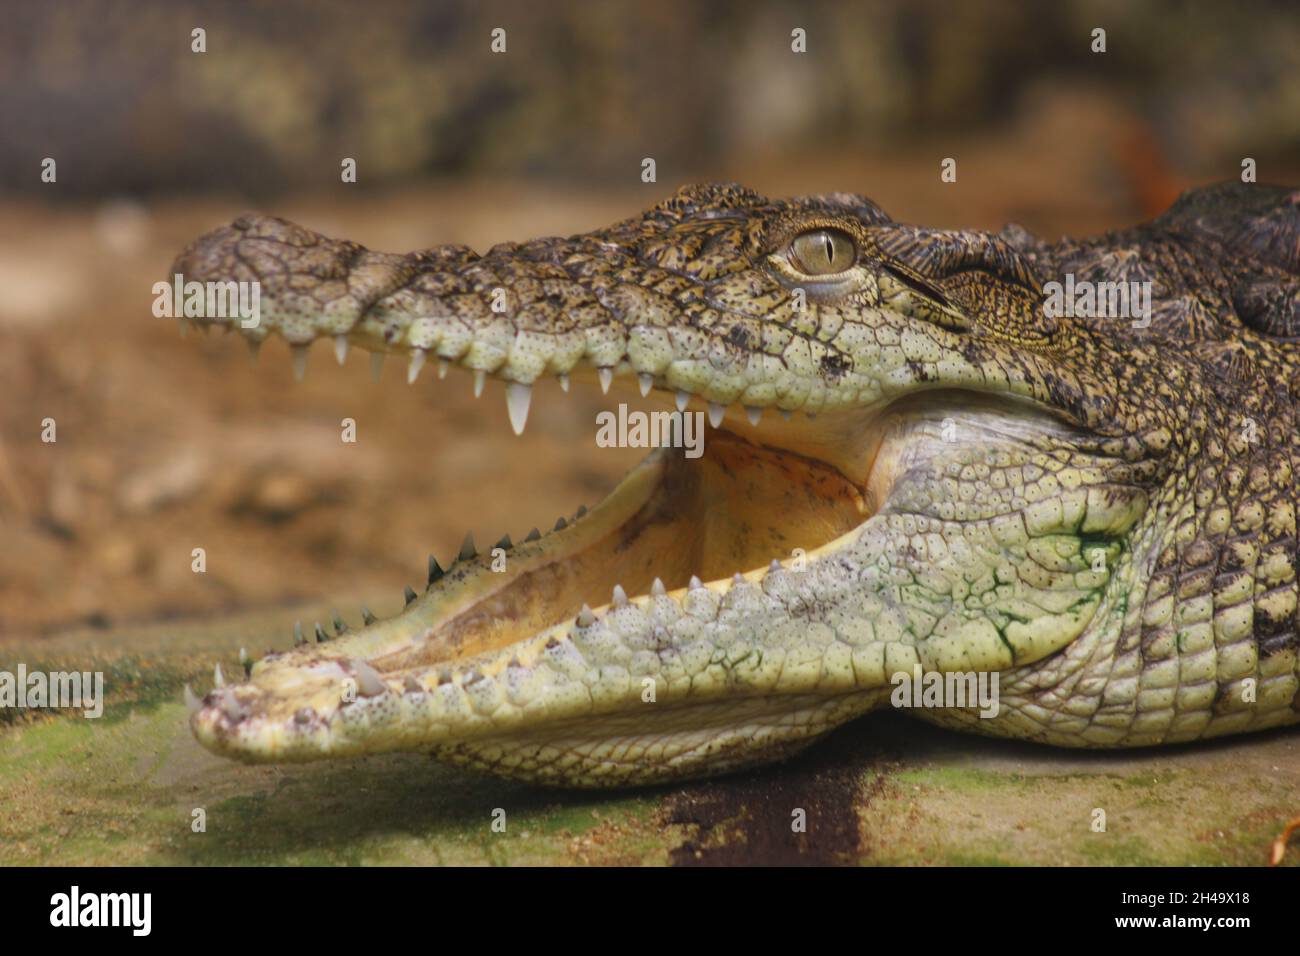 animal scale,profile view,Aggression,animal eye,animal mouth,water,animal head,focus on foreground,Mouth,mouth Open,no people,animal teeth,communicati Stock Photo